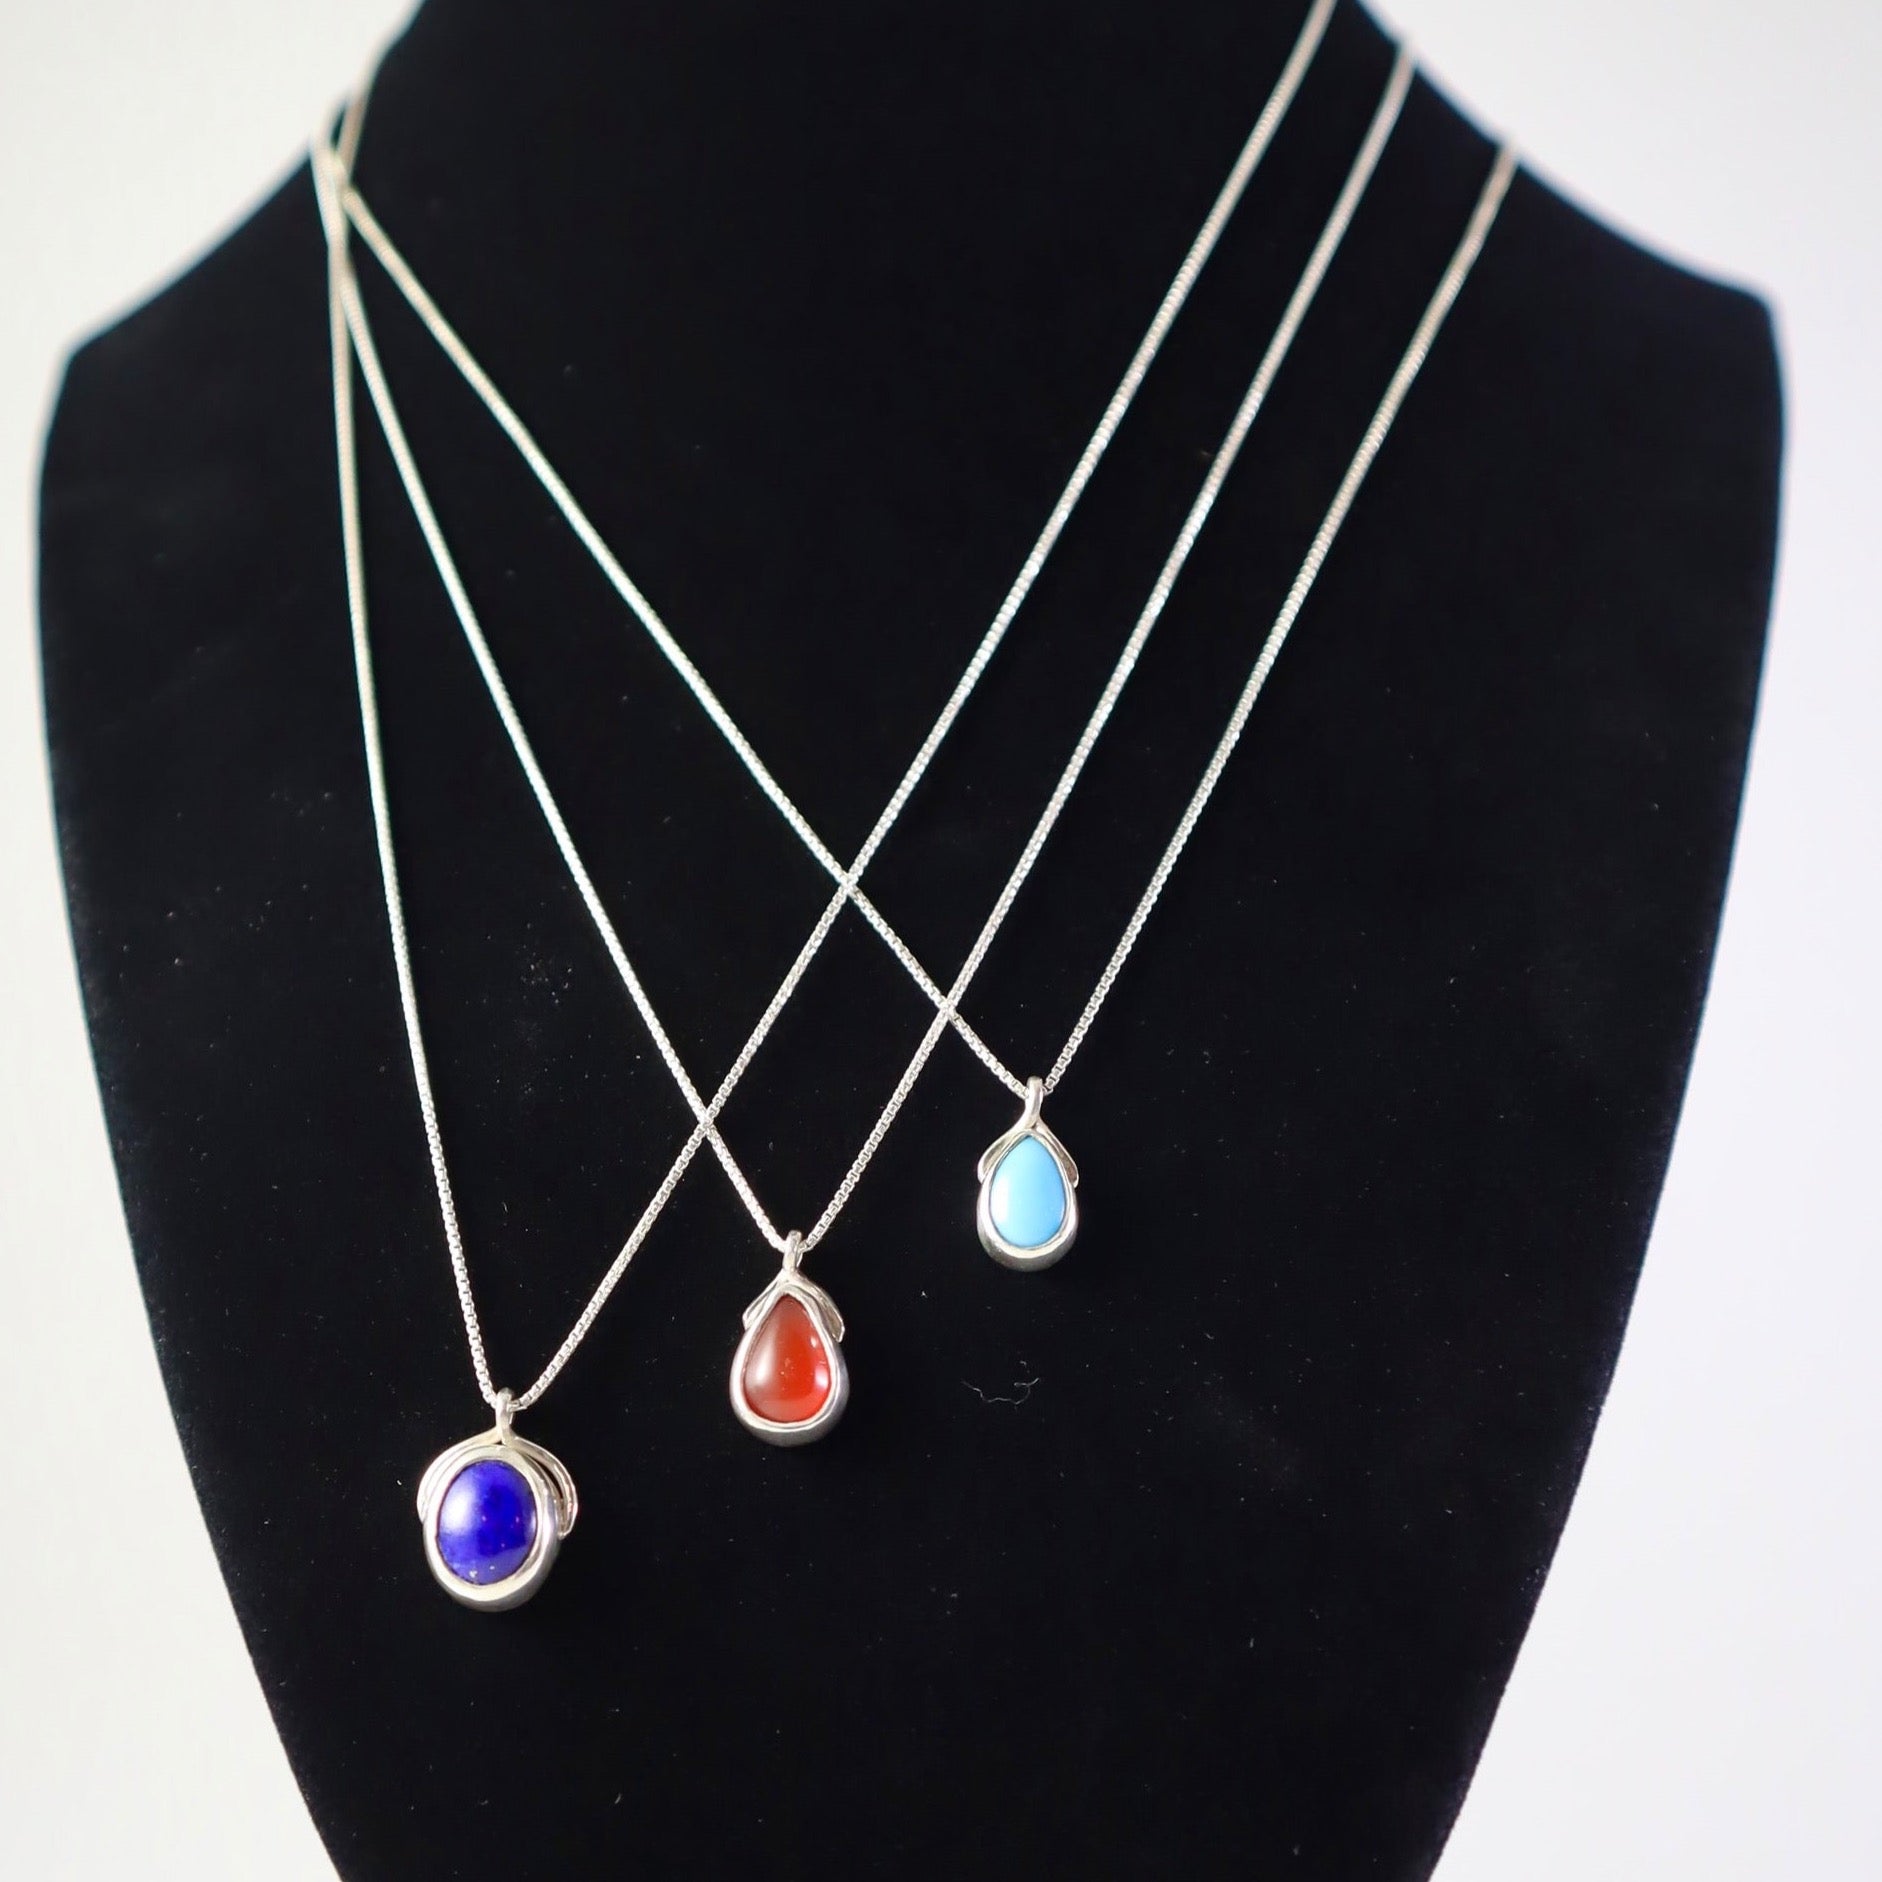 dainty necklace with set stones, lapis, carnelian and genuine turquoise.